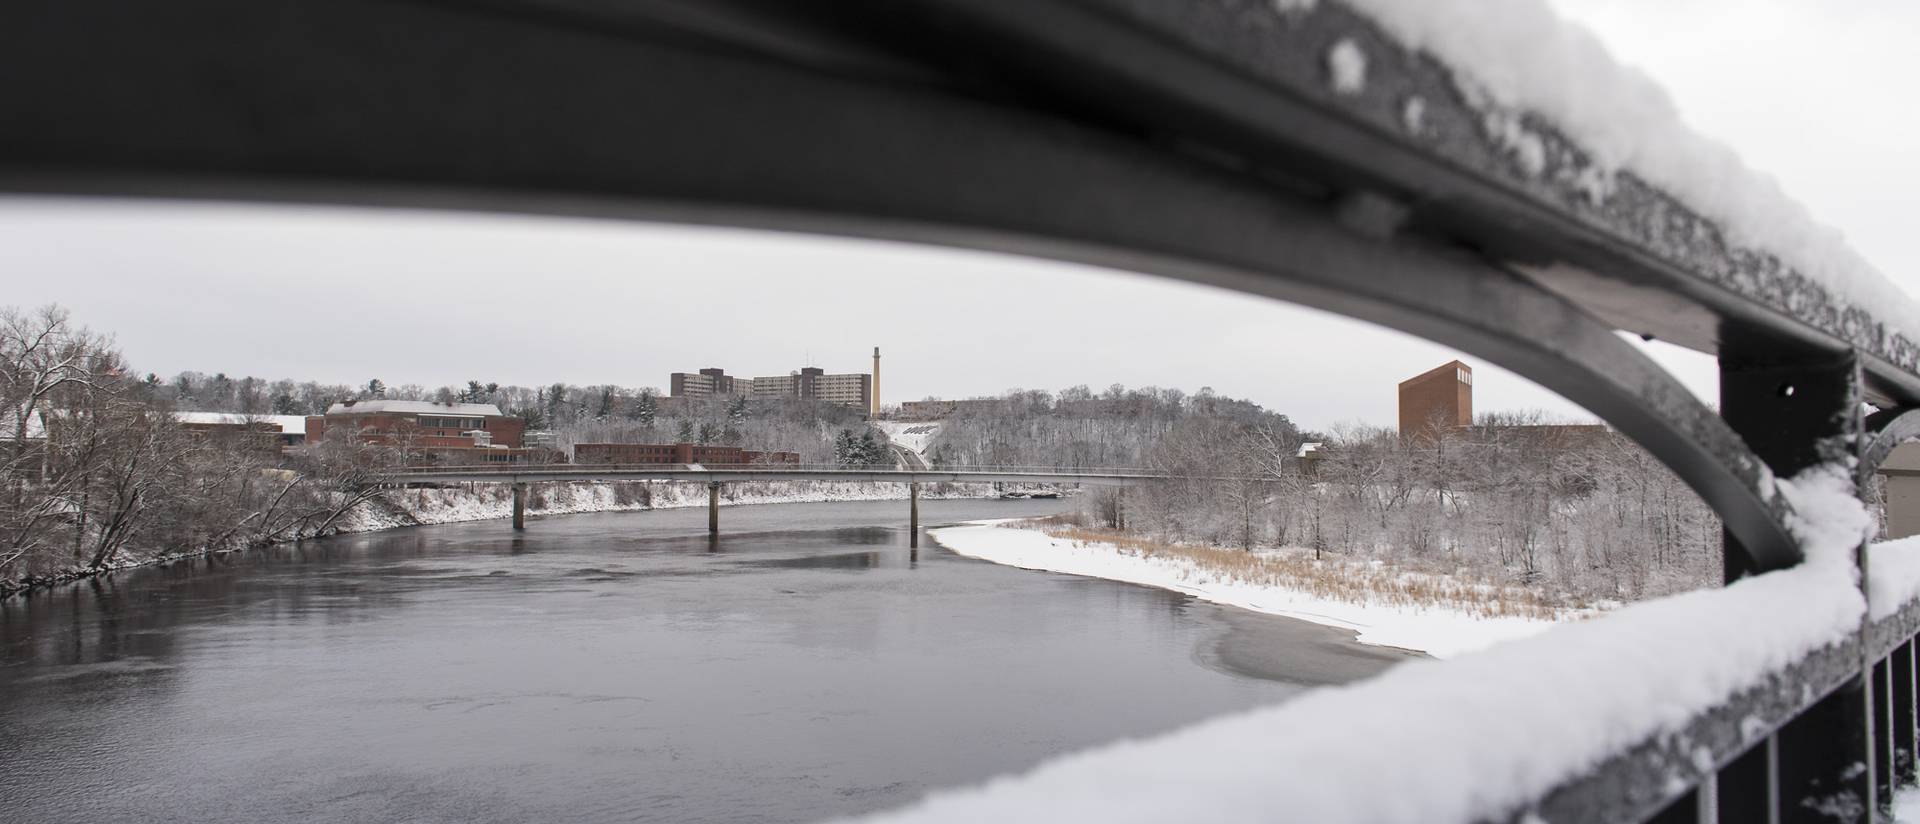 A view of the Chippewa River and campus taken from the Water Street bridge during the winter.